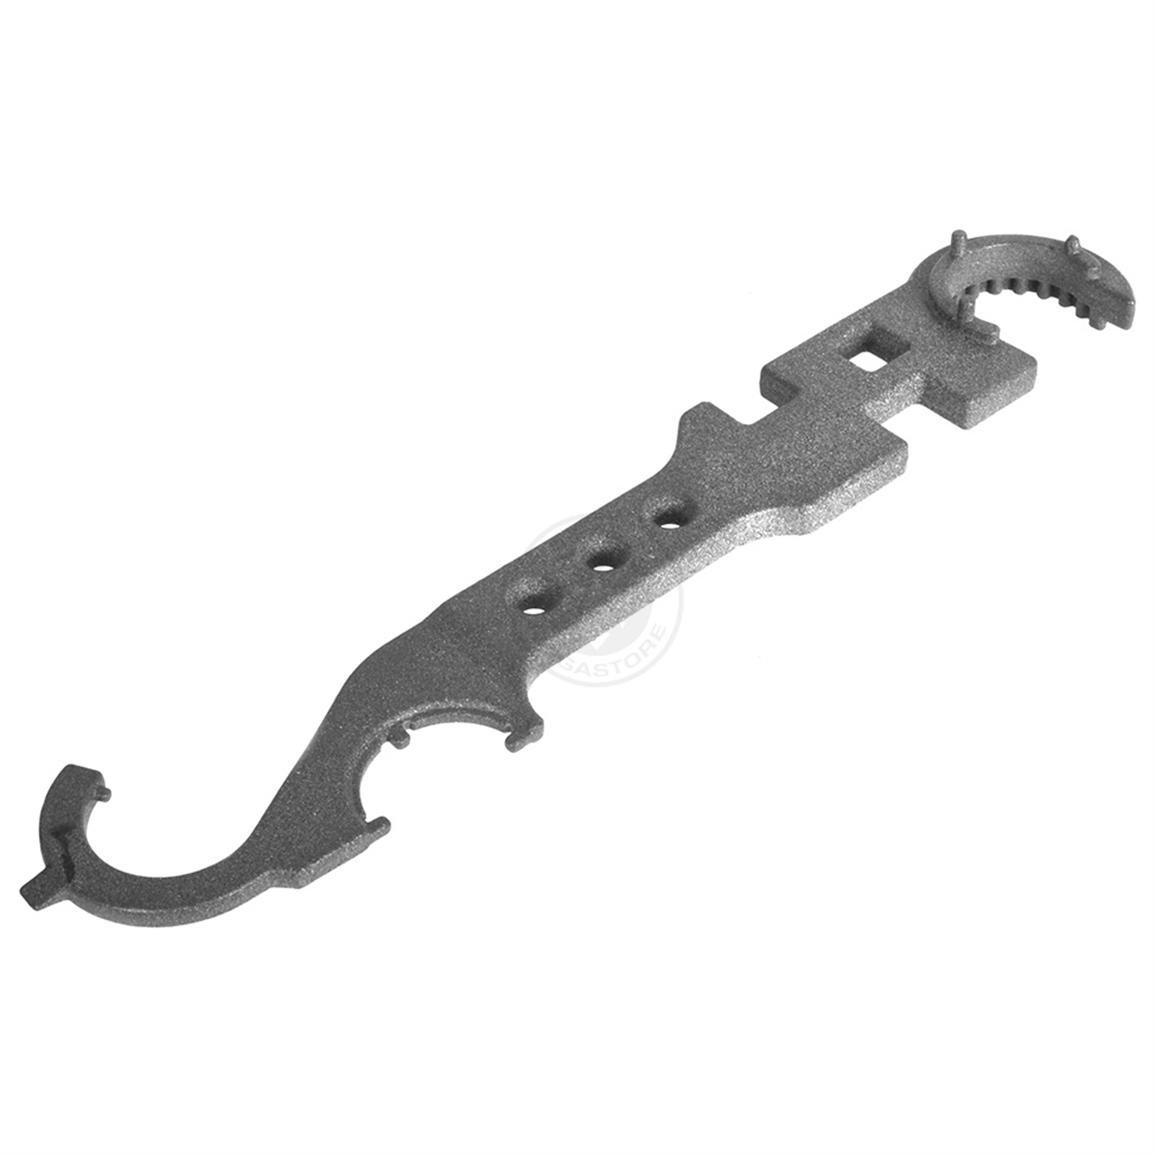 Aim Sports AR-15/M4 Combo Wrench Tool